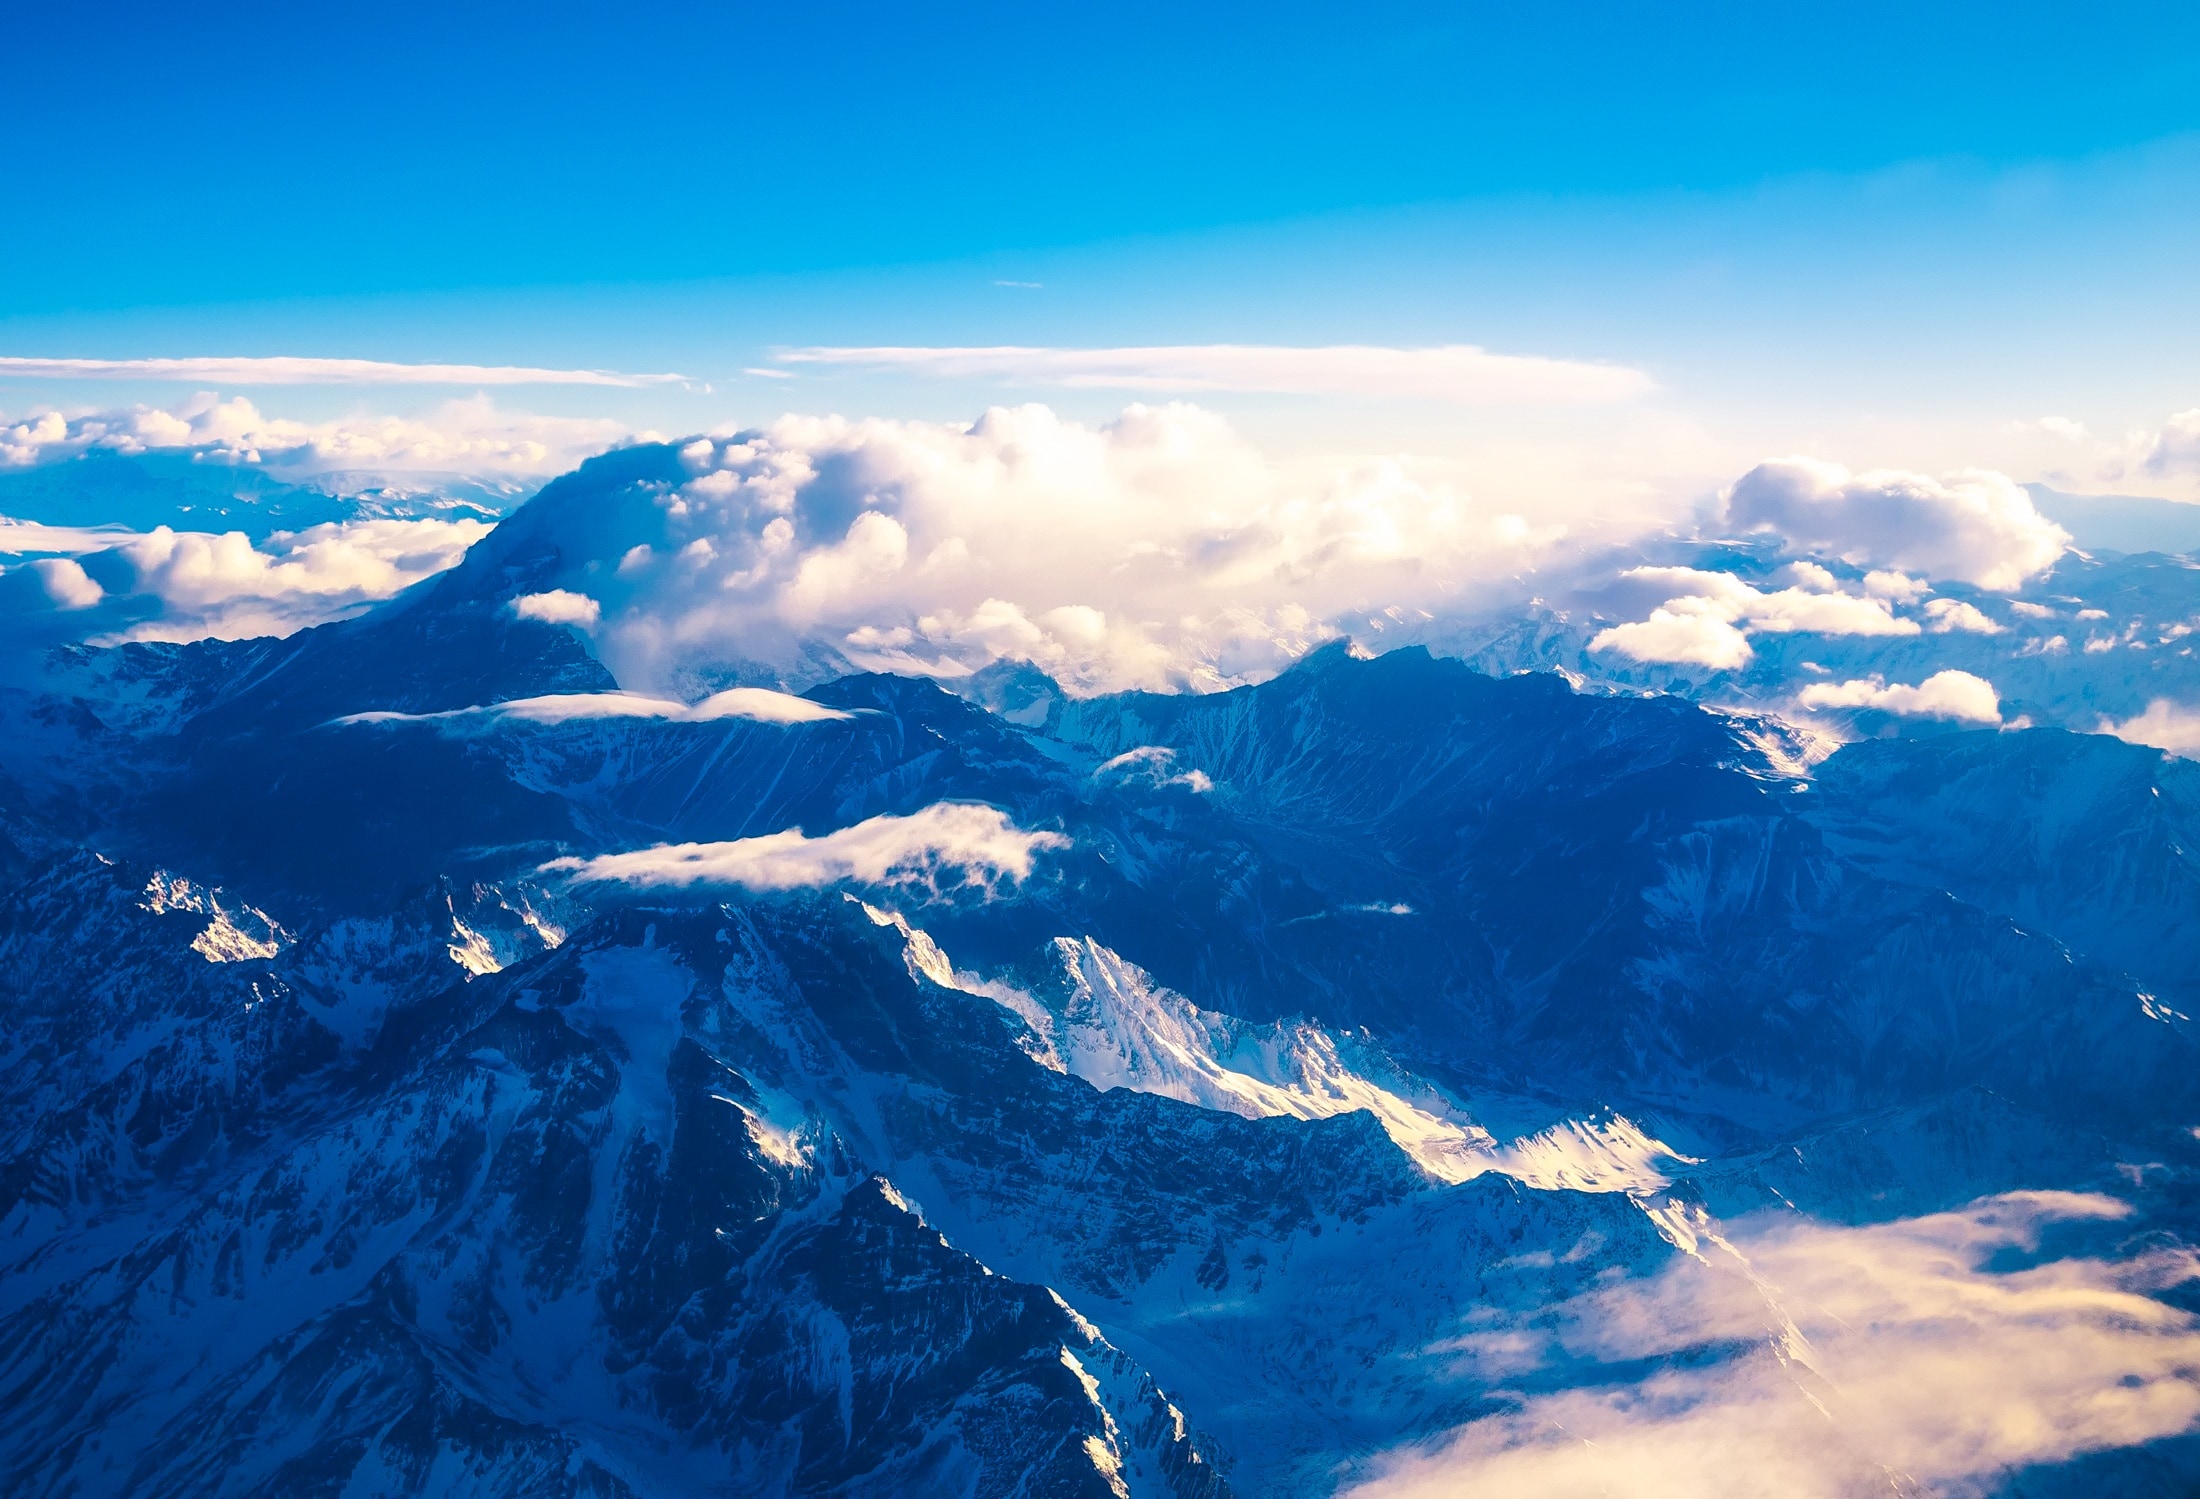 Snow, Argentina, Aerial View, Mountains, cloud - sky, blue